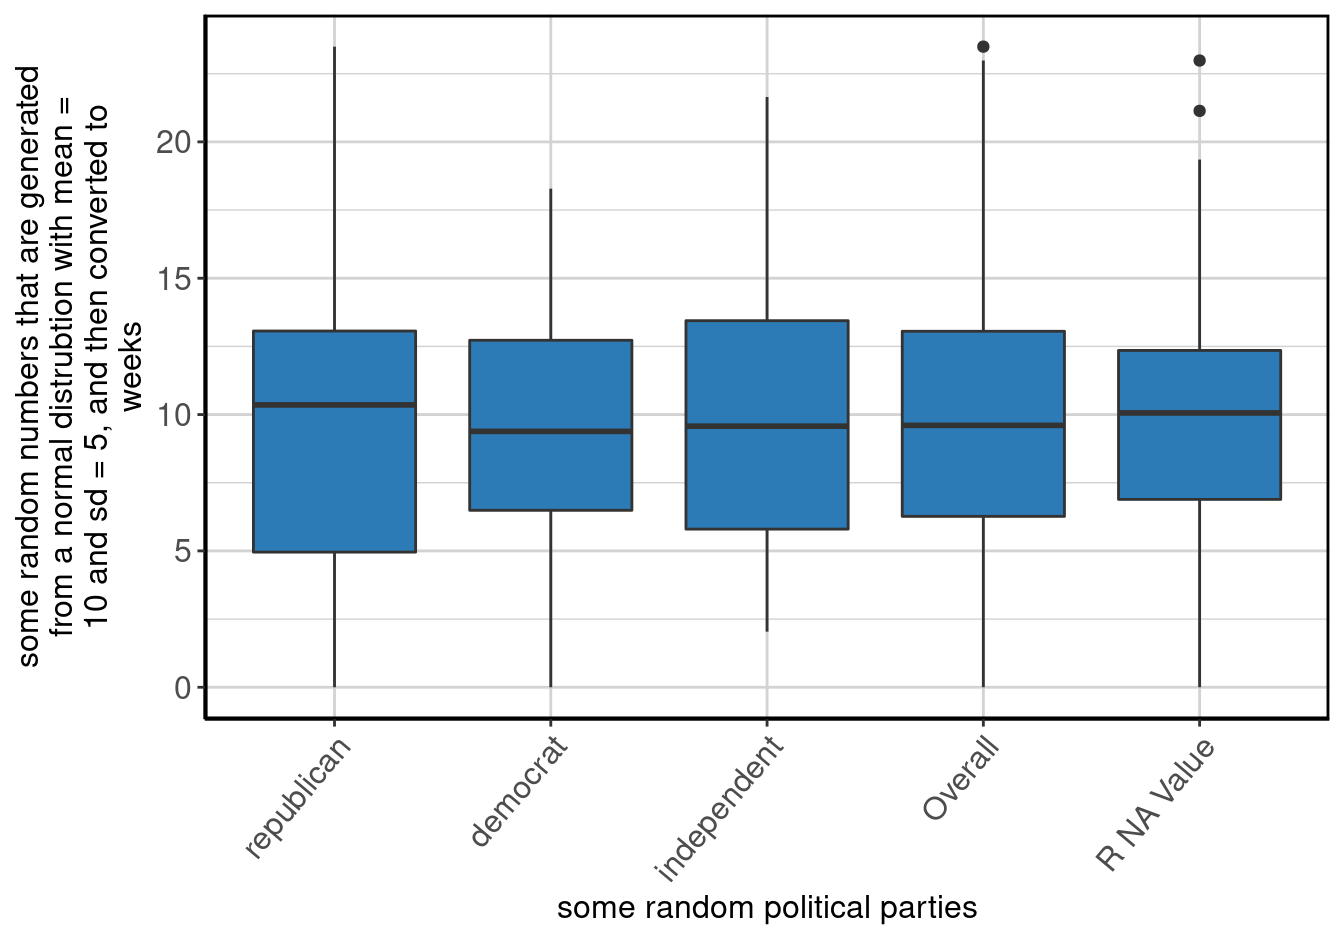 Boxplot of <b>some random numbers that are generated from a normal distrubtion with mean = 10 and sd = 5, and then converted to weeks</b> by <b>some random political parties</b>.